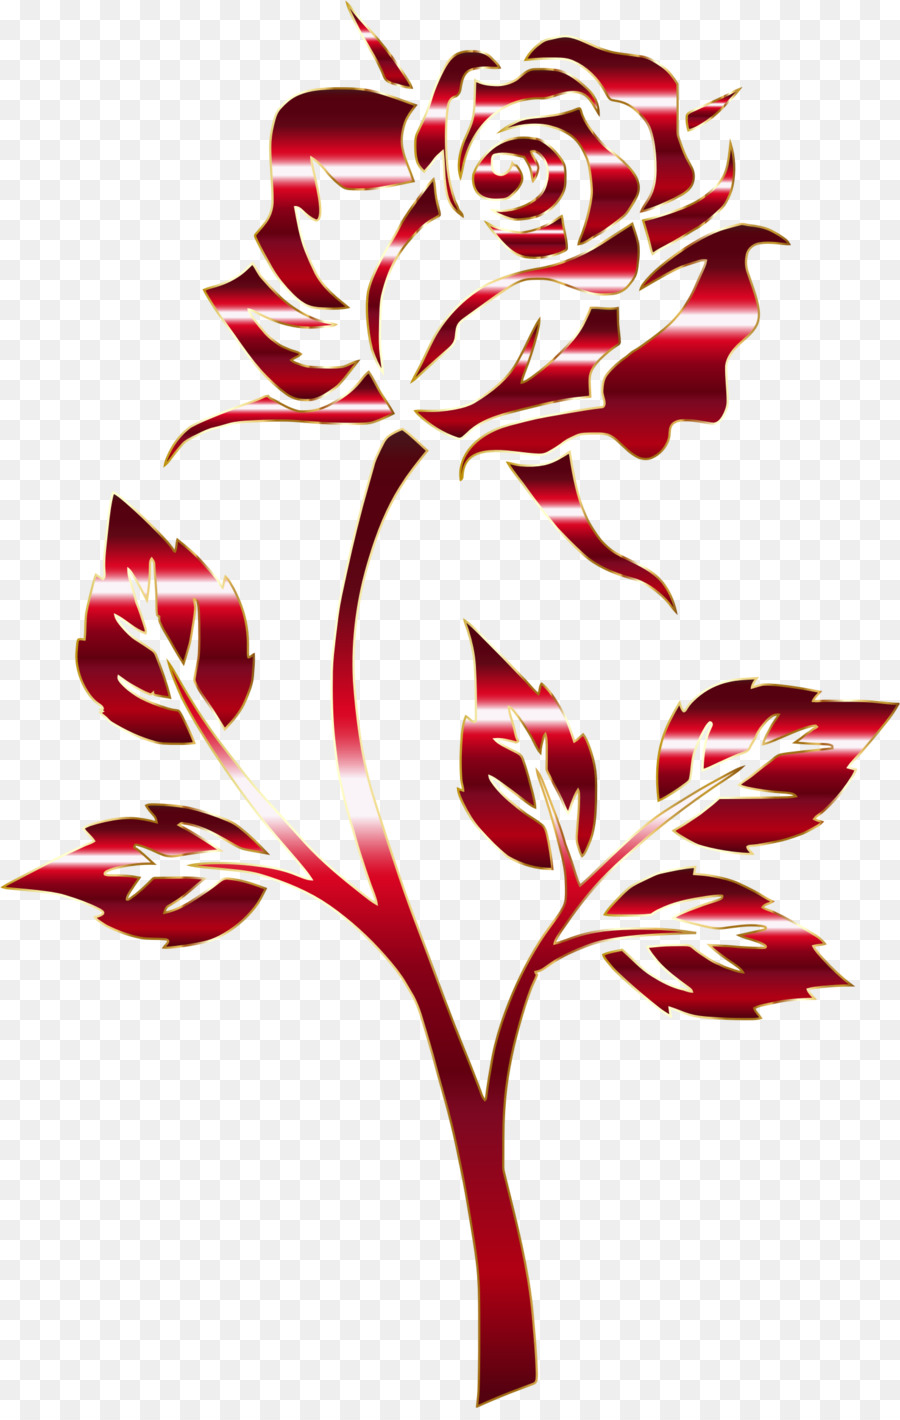 Rose Scalable Vector Graphics Clip art - Rose Silhouette Cliparts png download - 1477*2310 - Free Transparent Rose png Download.